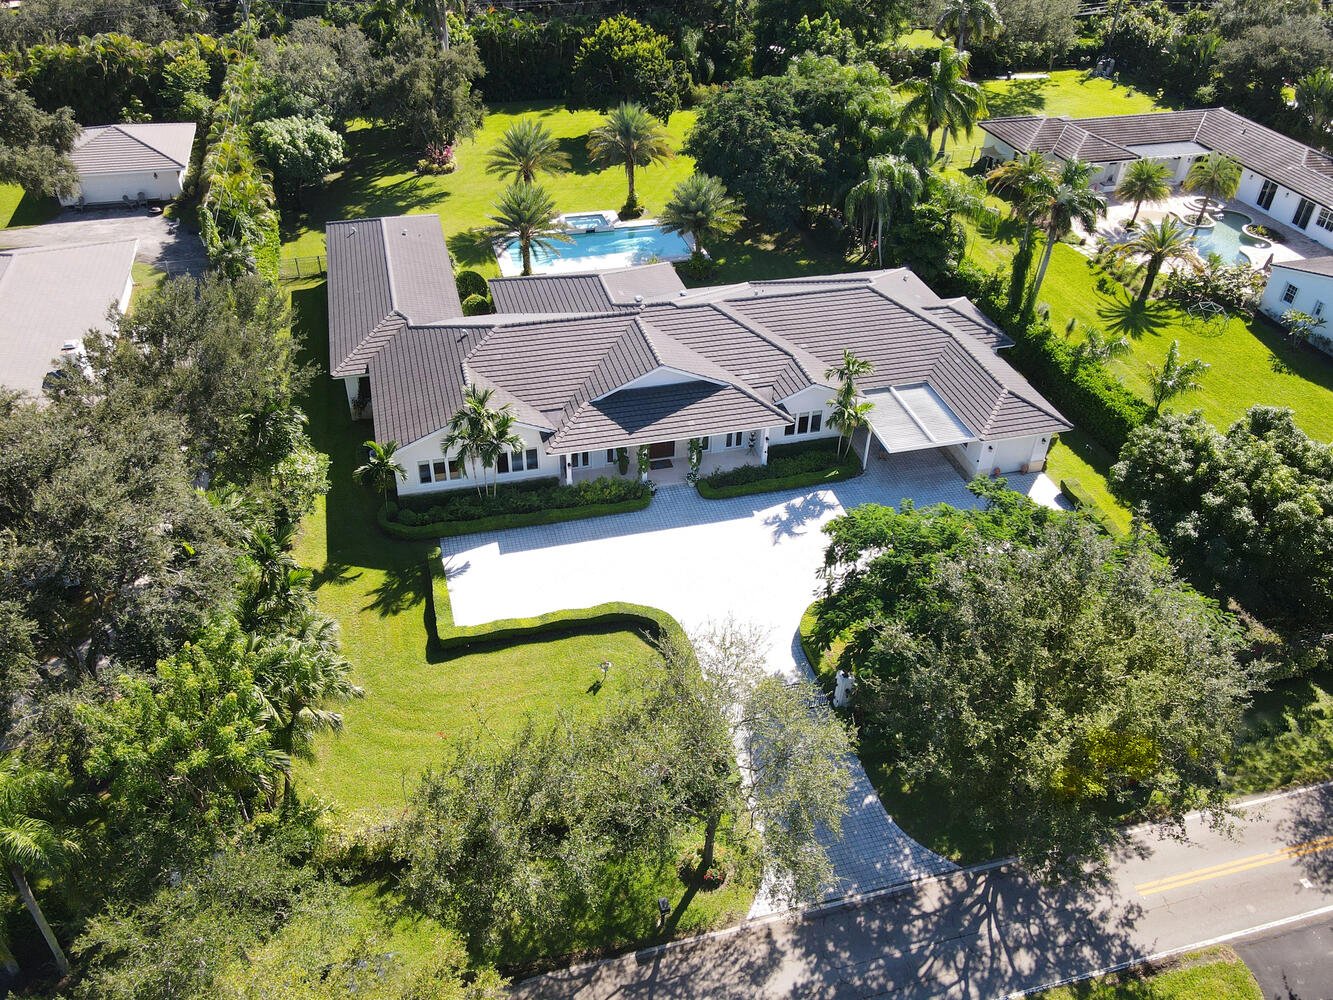 Master Brokers Forum Listing: Check Out This 'Hamptons Meets Key West' Style North Pinecrest Home Asking $5.8 Million 1.jpg